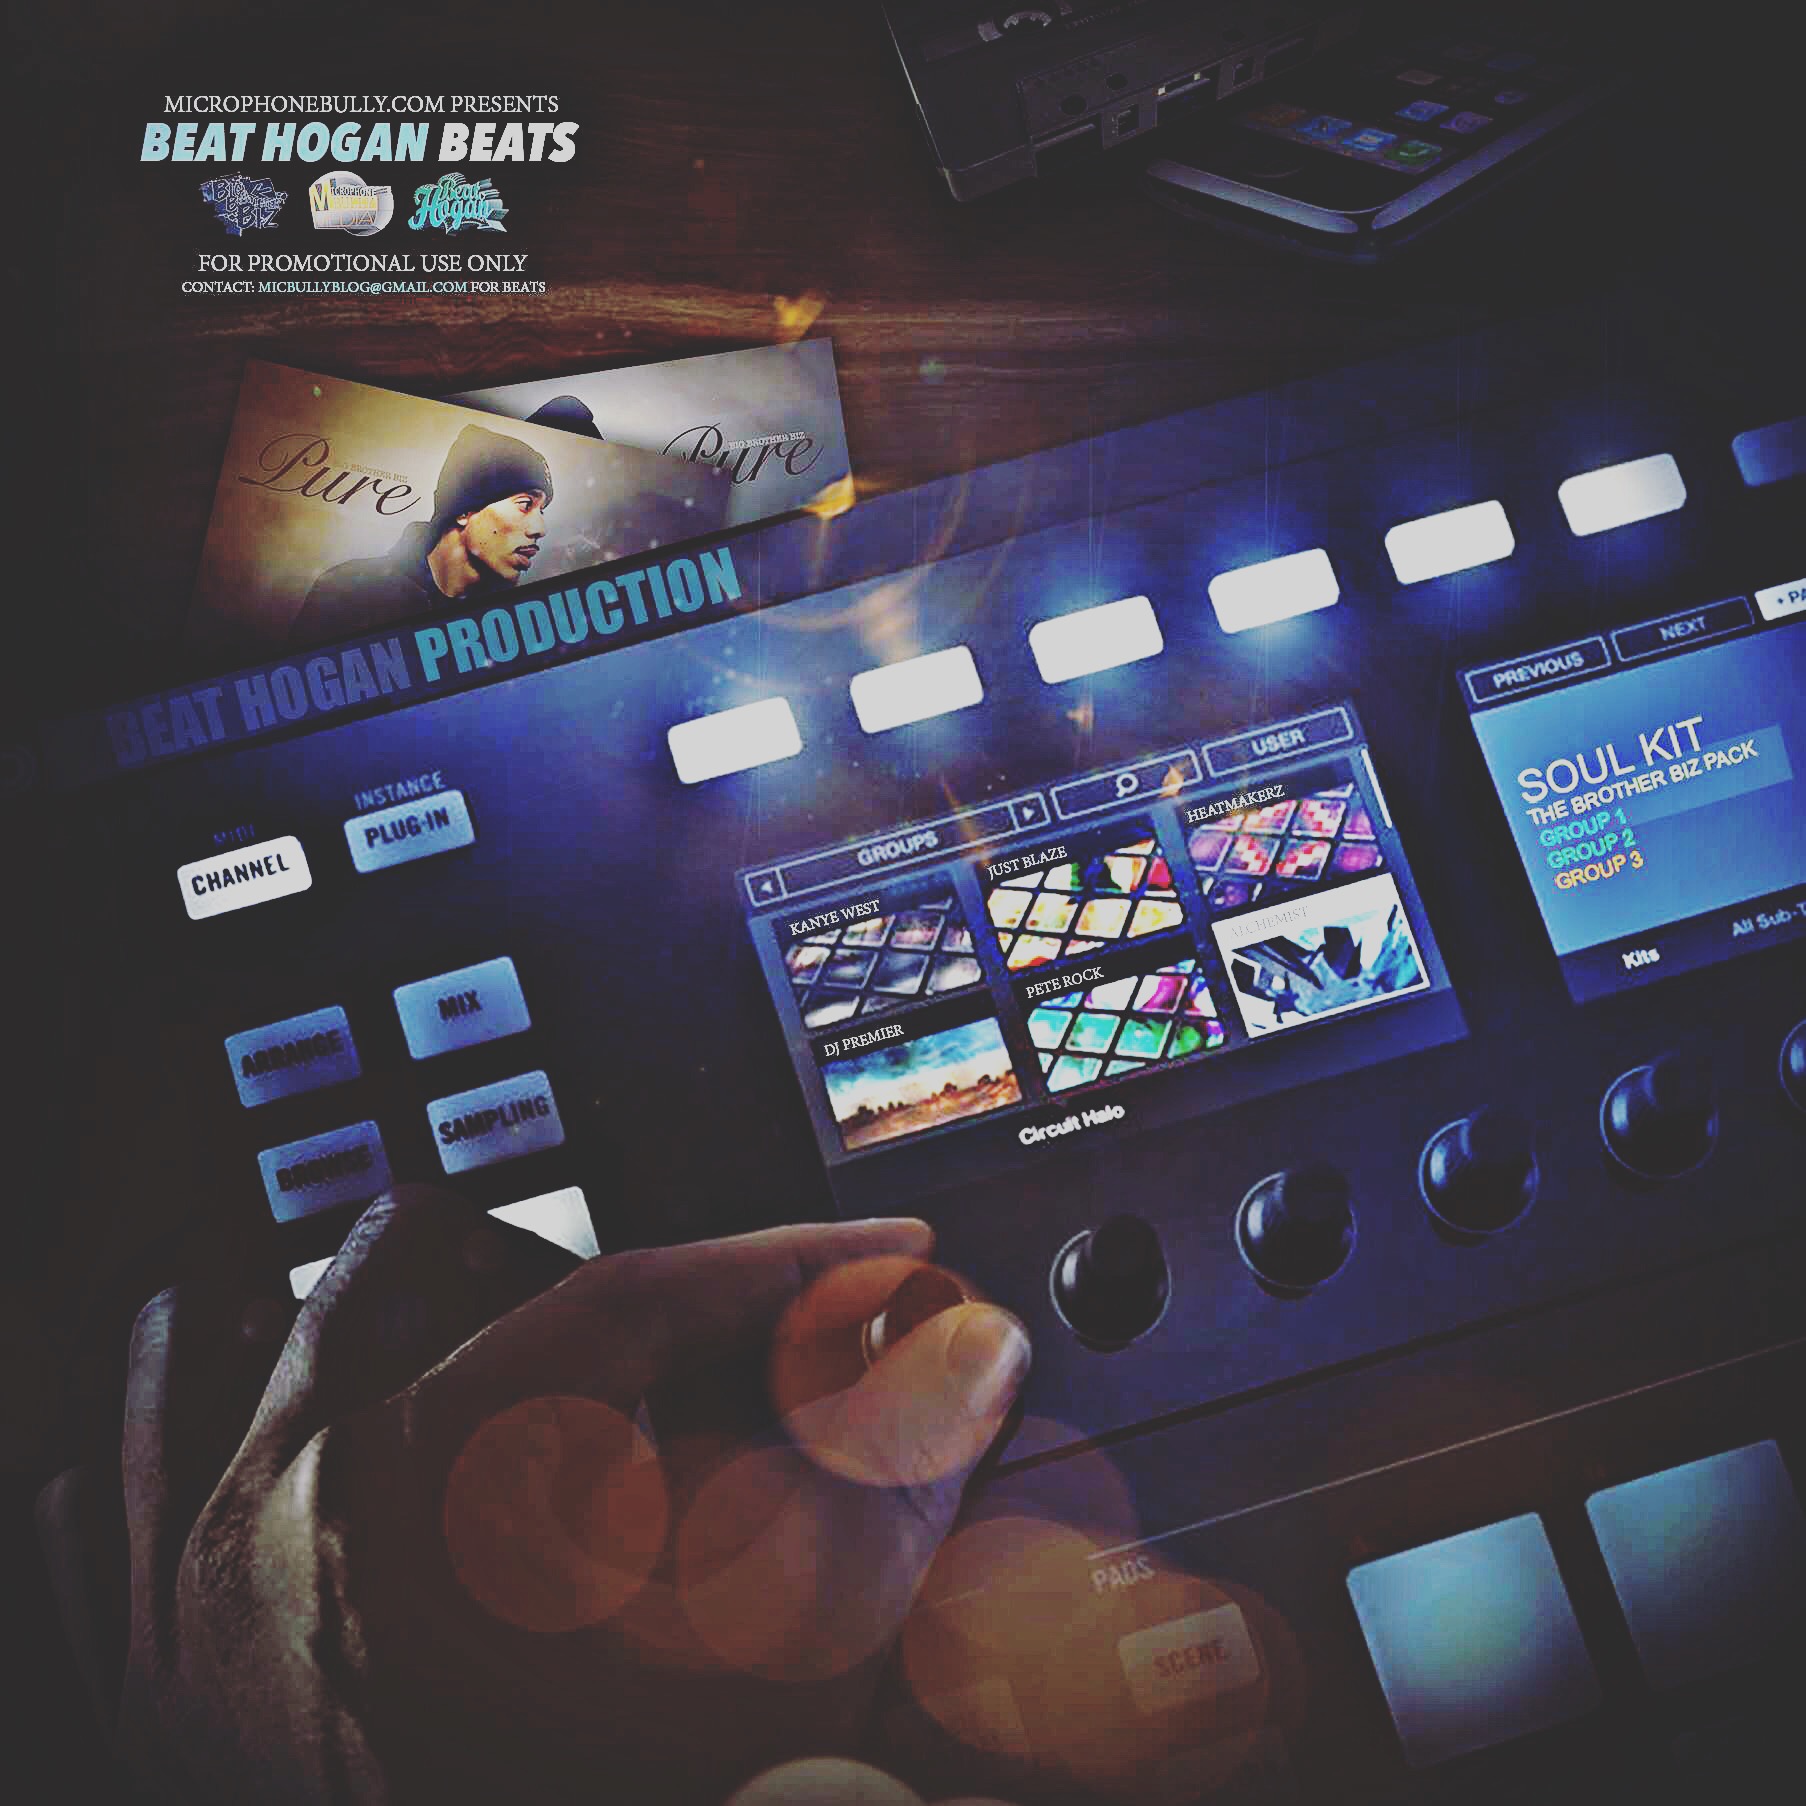 Music: The Beat Hogan “Instrumental Project” presented by @MicrophoneBully / @BigBrotherBiz